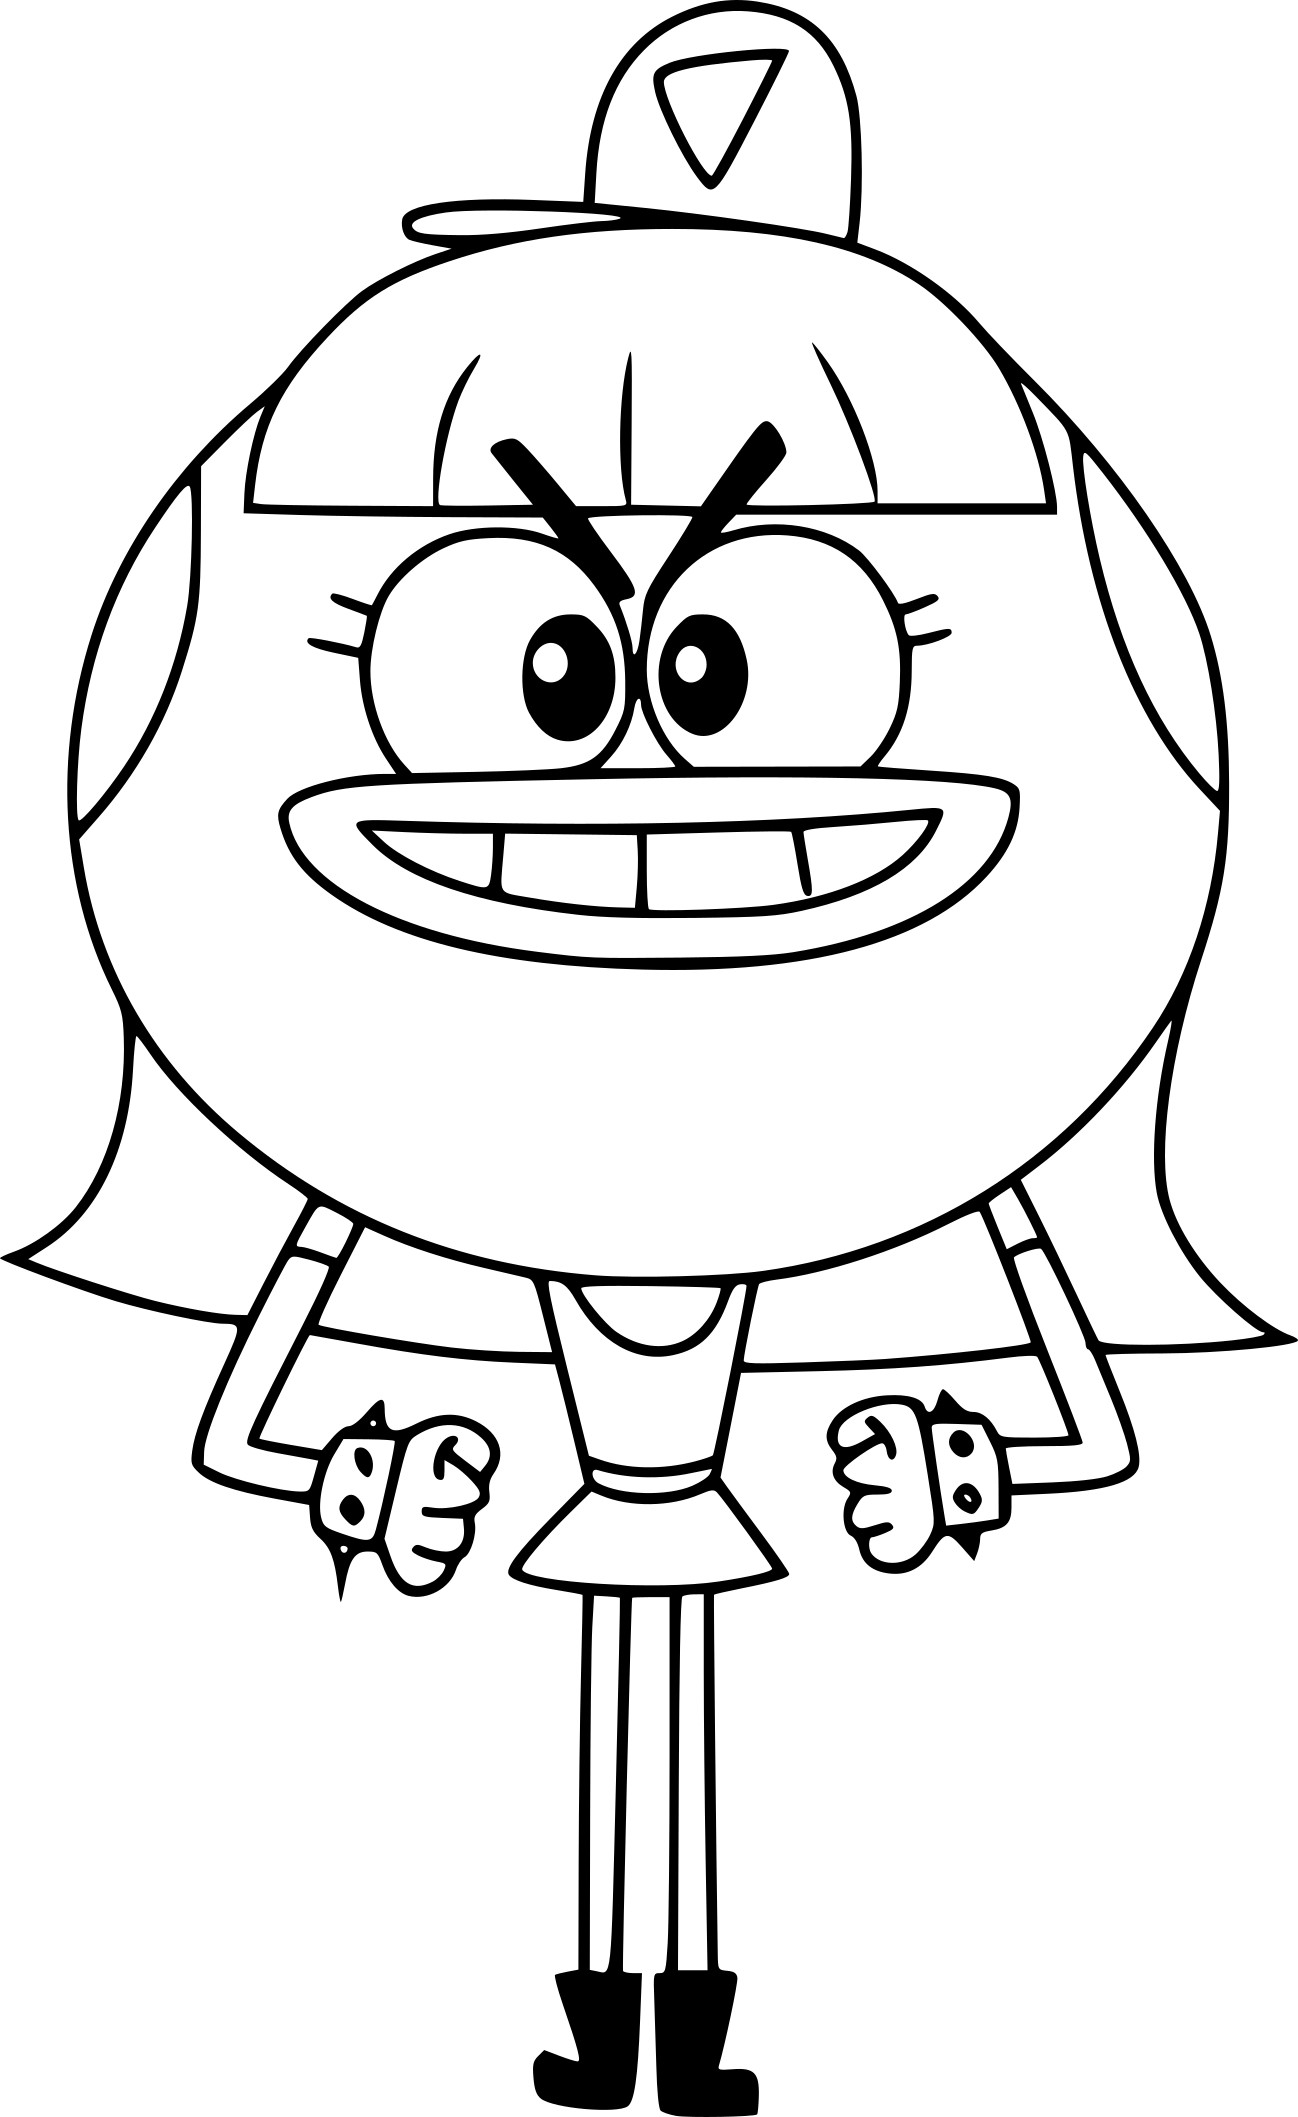 Zoona Breadwinners coloring page